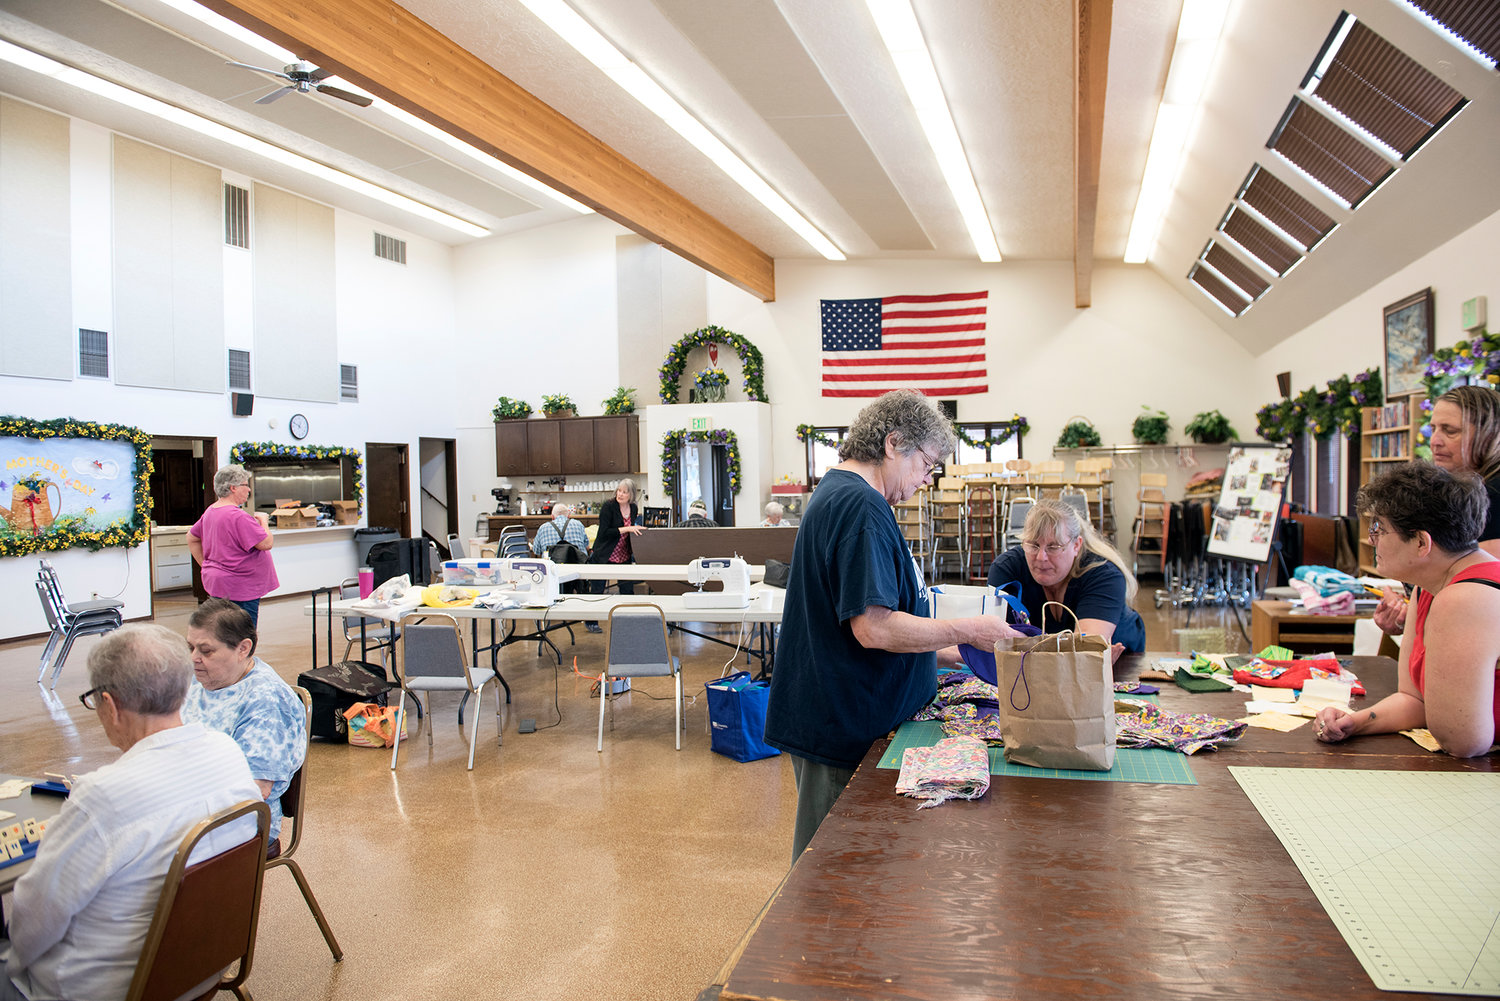 2017 FILE PHOTO — People play games, carve wooden figurines and go through sewing supplies on a typical Thursday afternoon at the Toledo Senior Center.